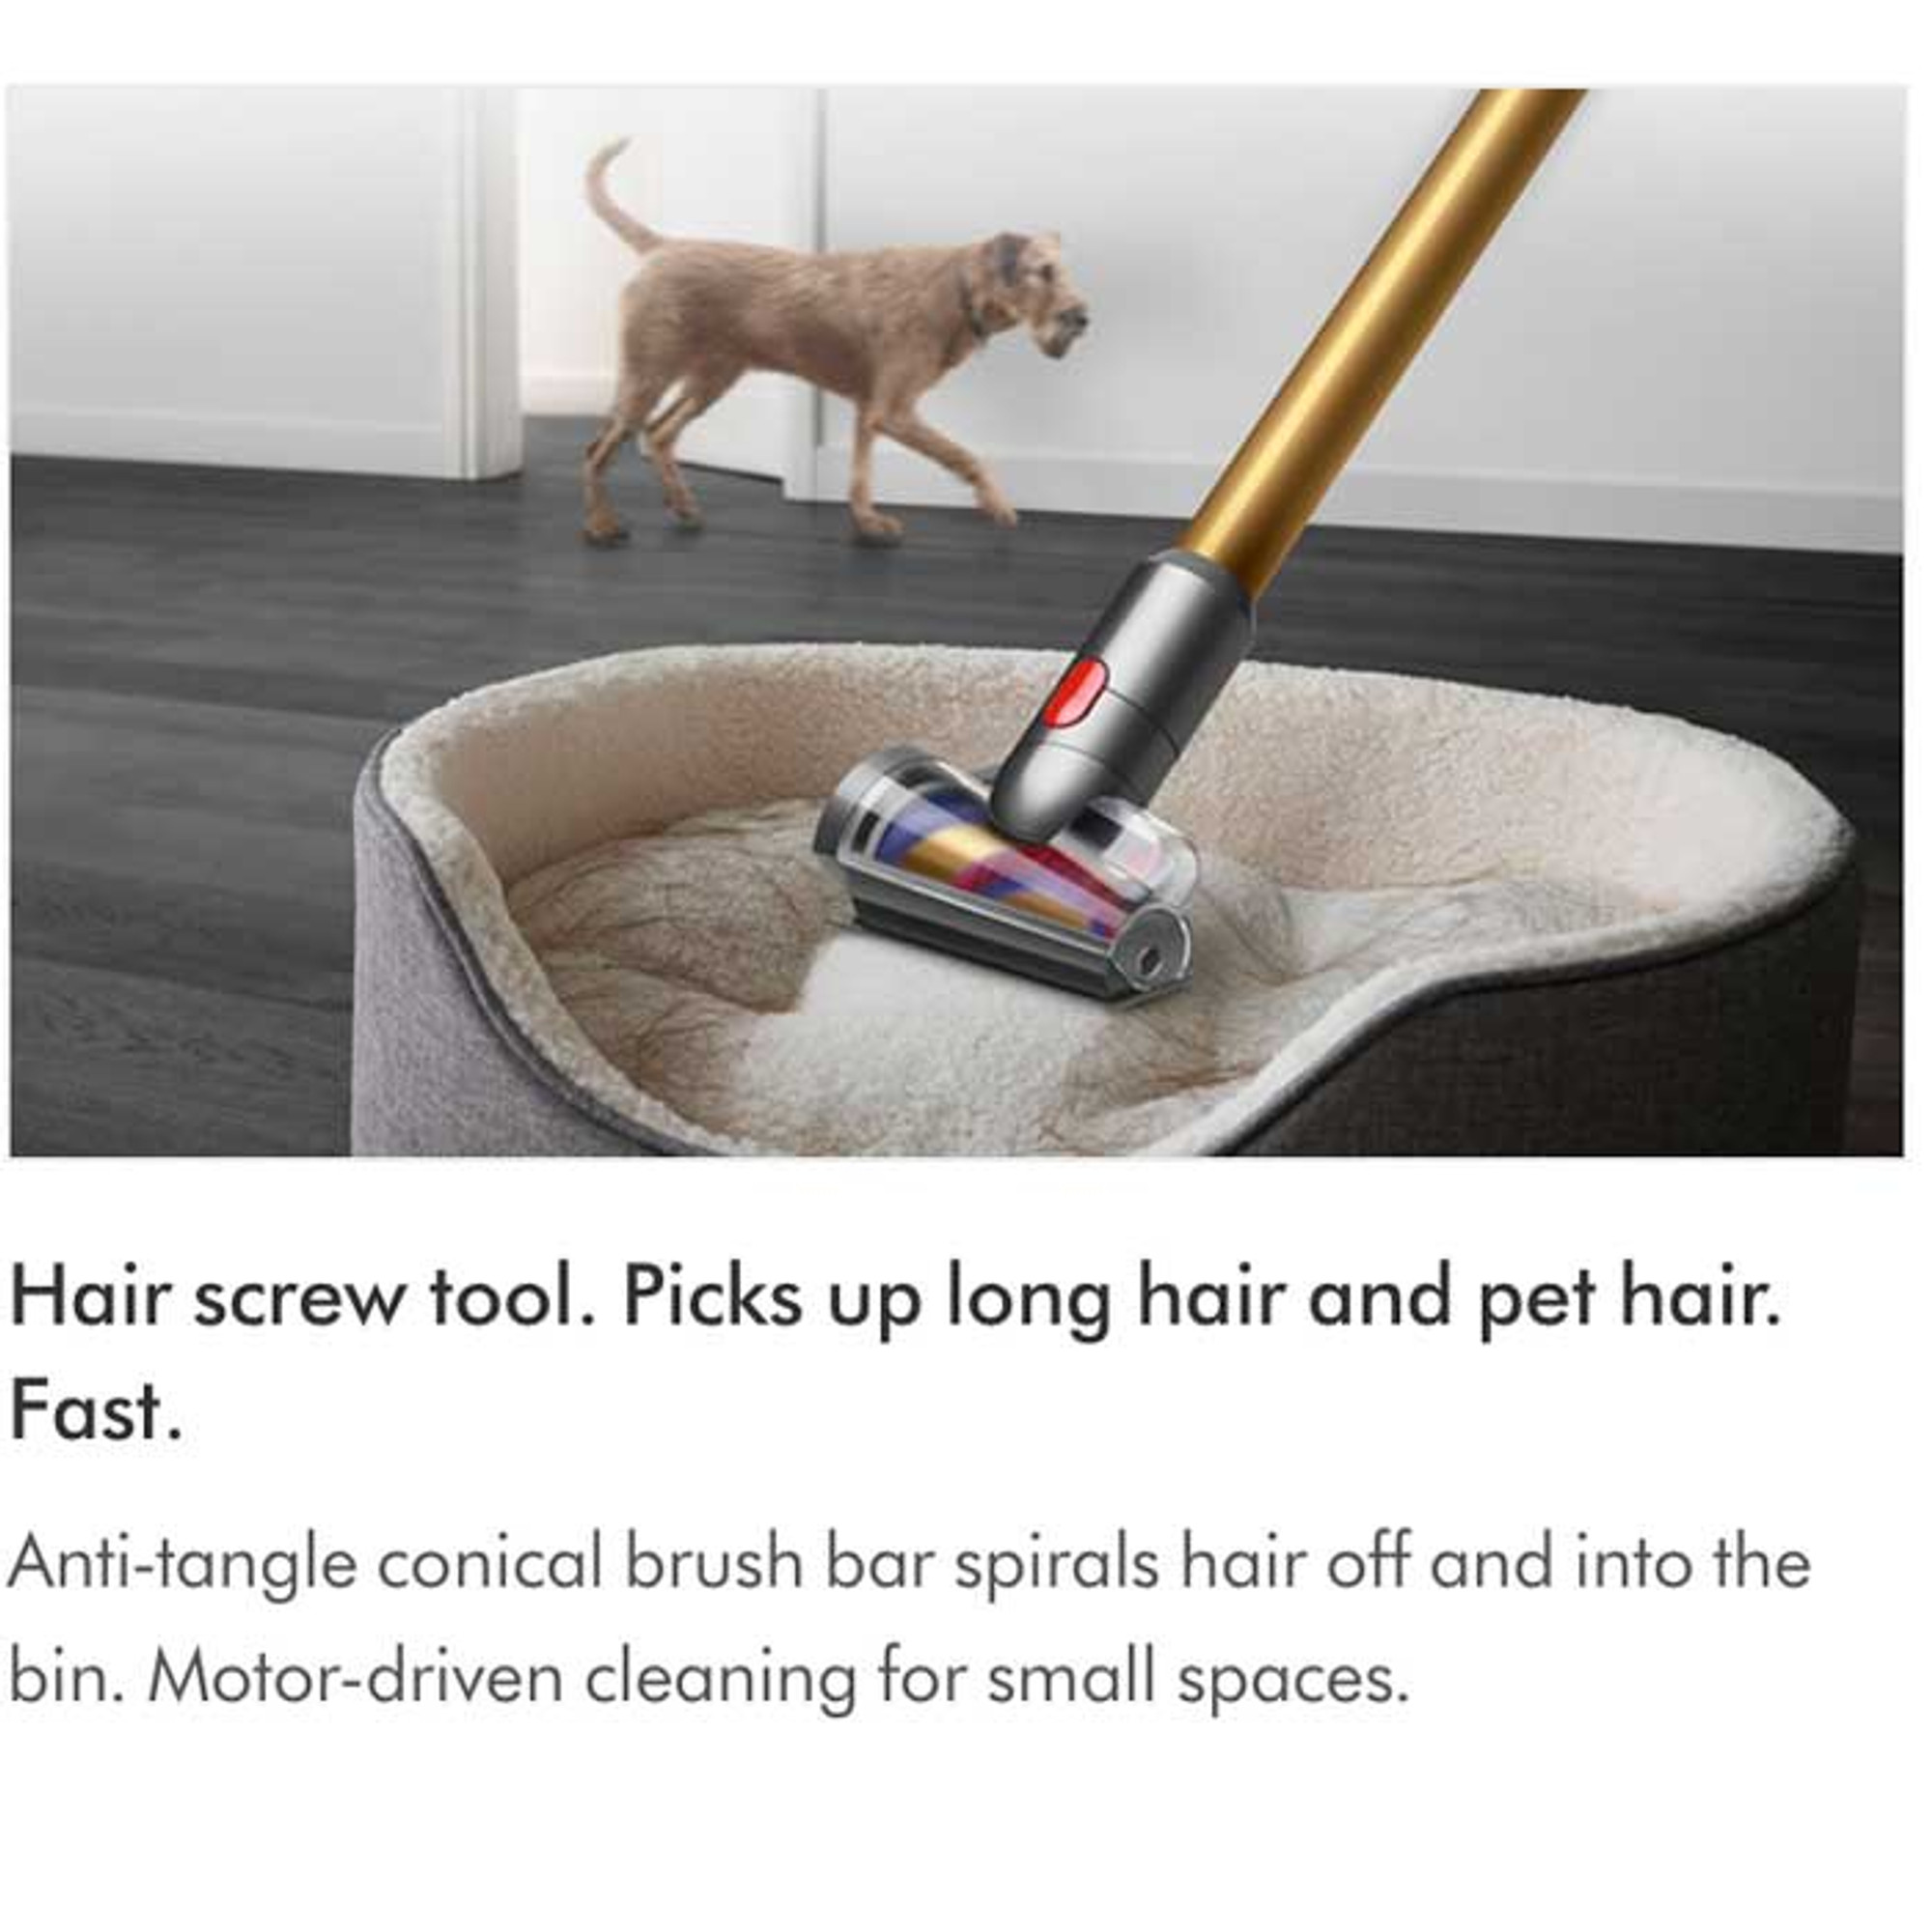 Buy Dyson V15 Detect Total Clean Cordless Vacuum from Canada at